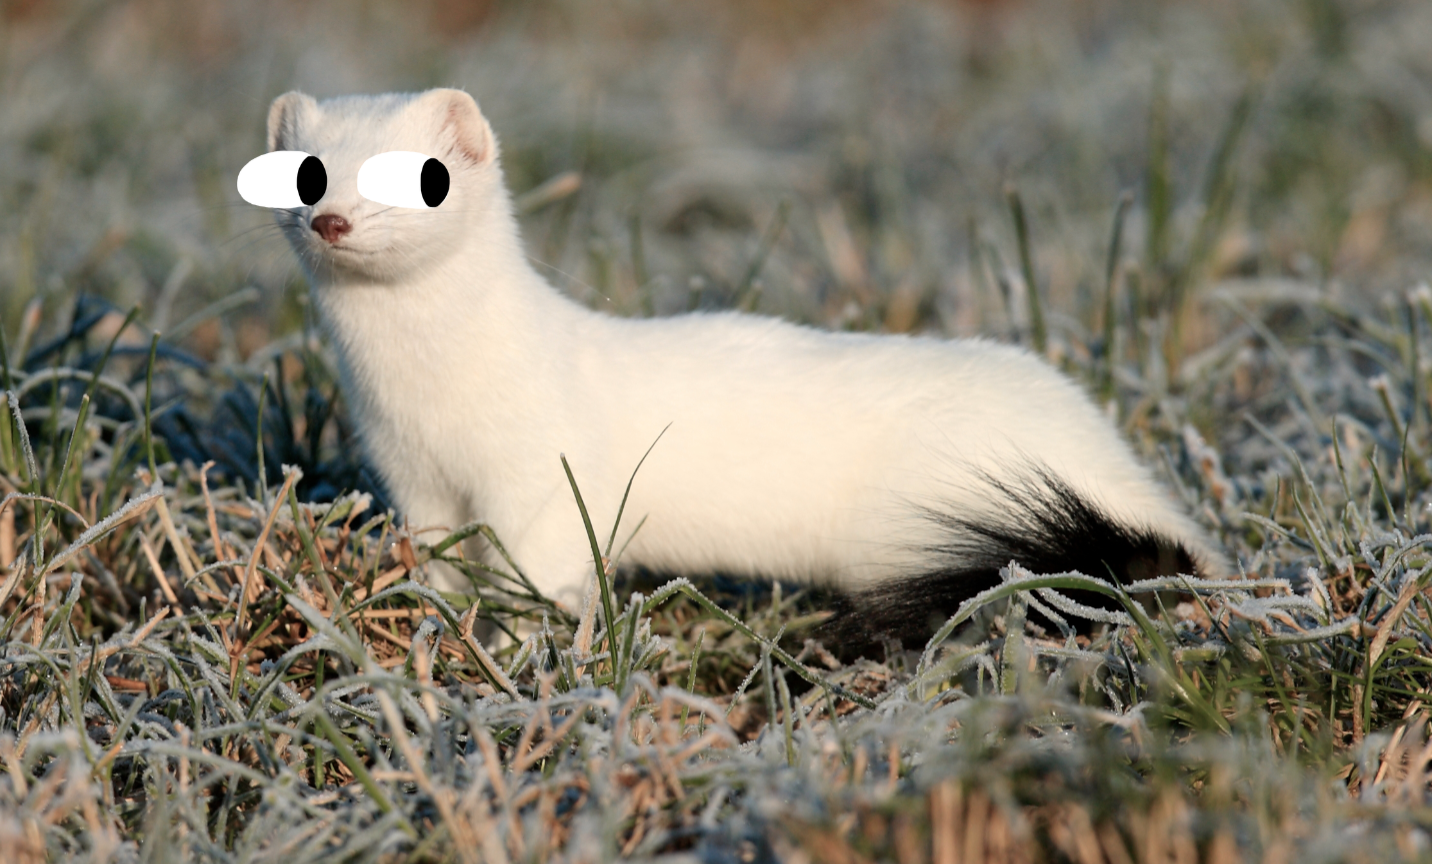 A stoat or a weasel